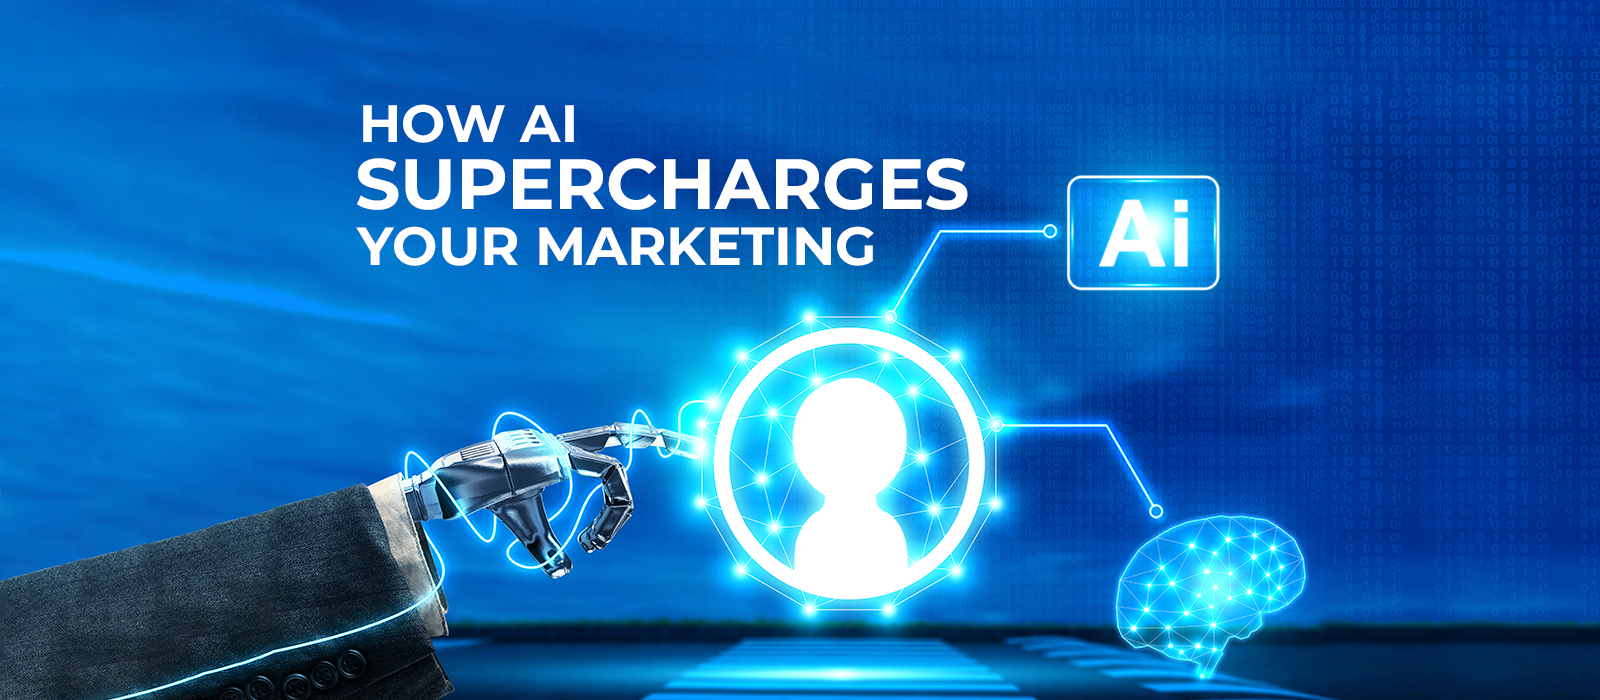 How AI supercharges your marketing 3